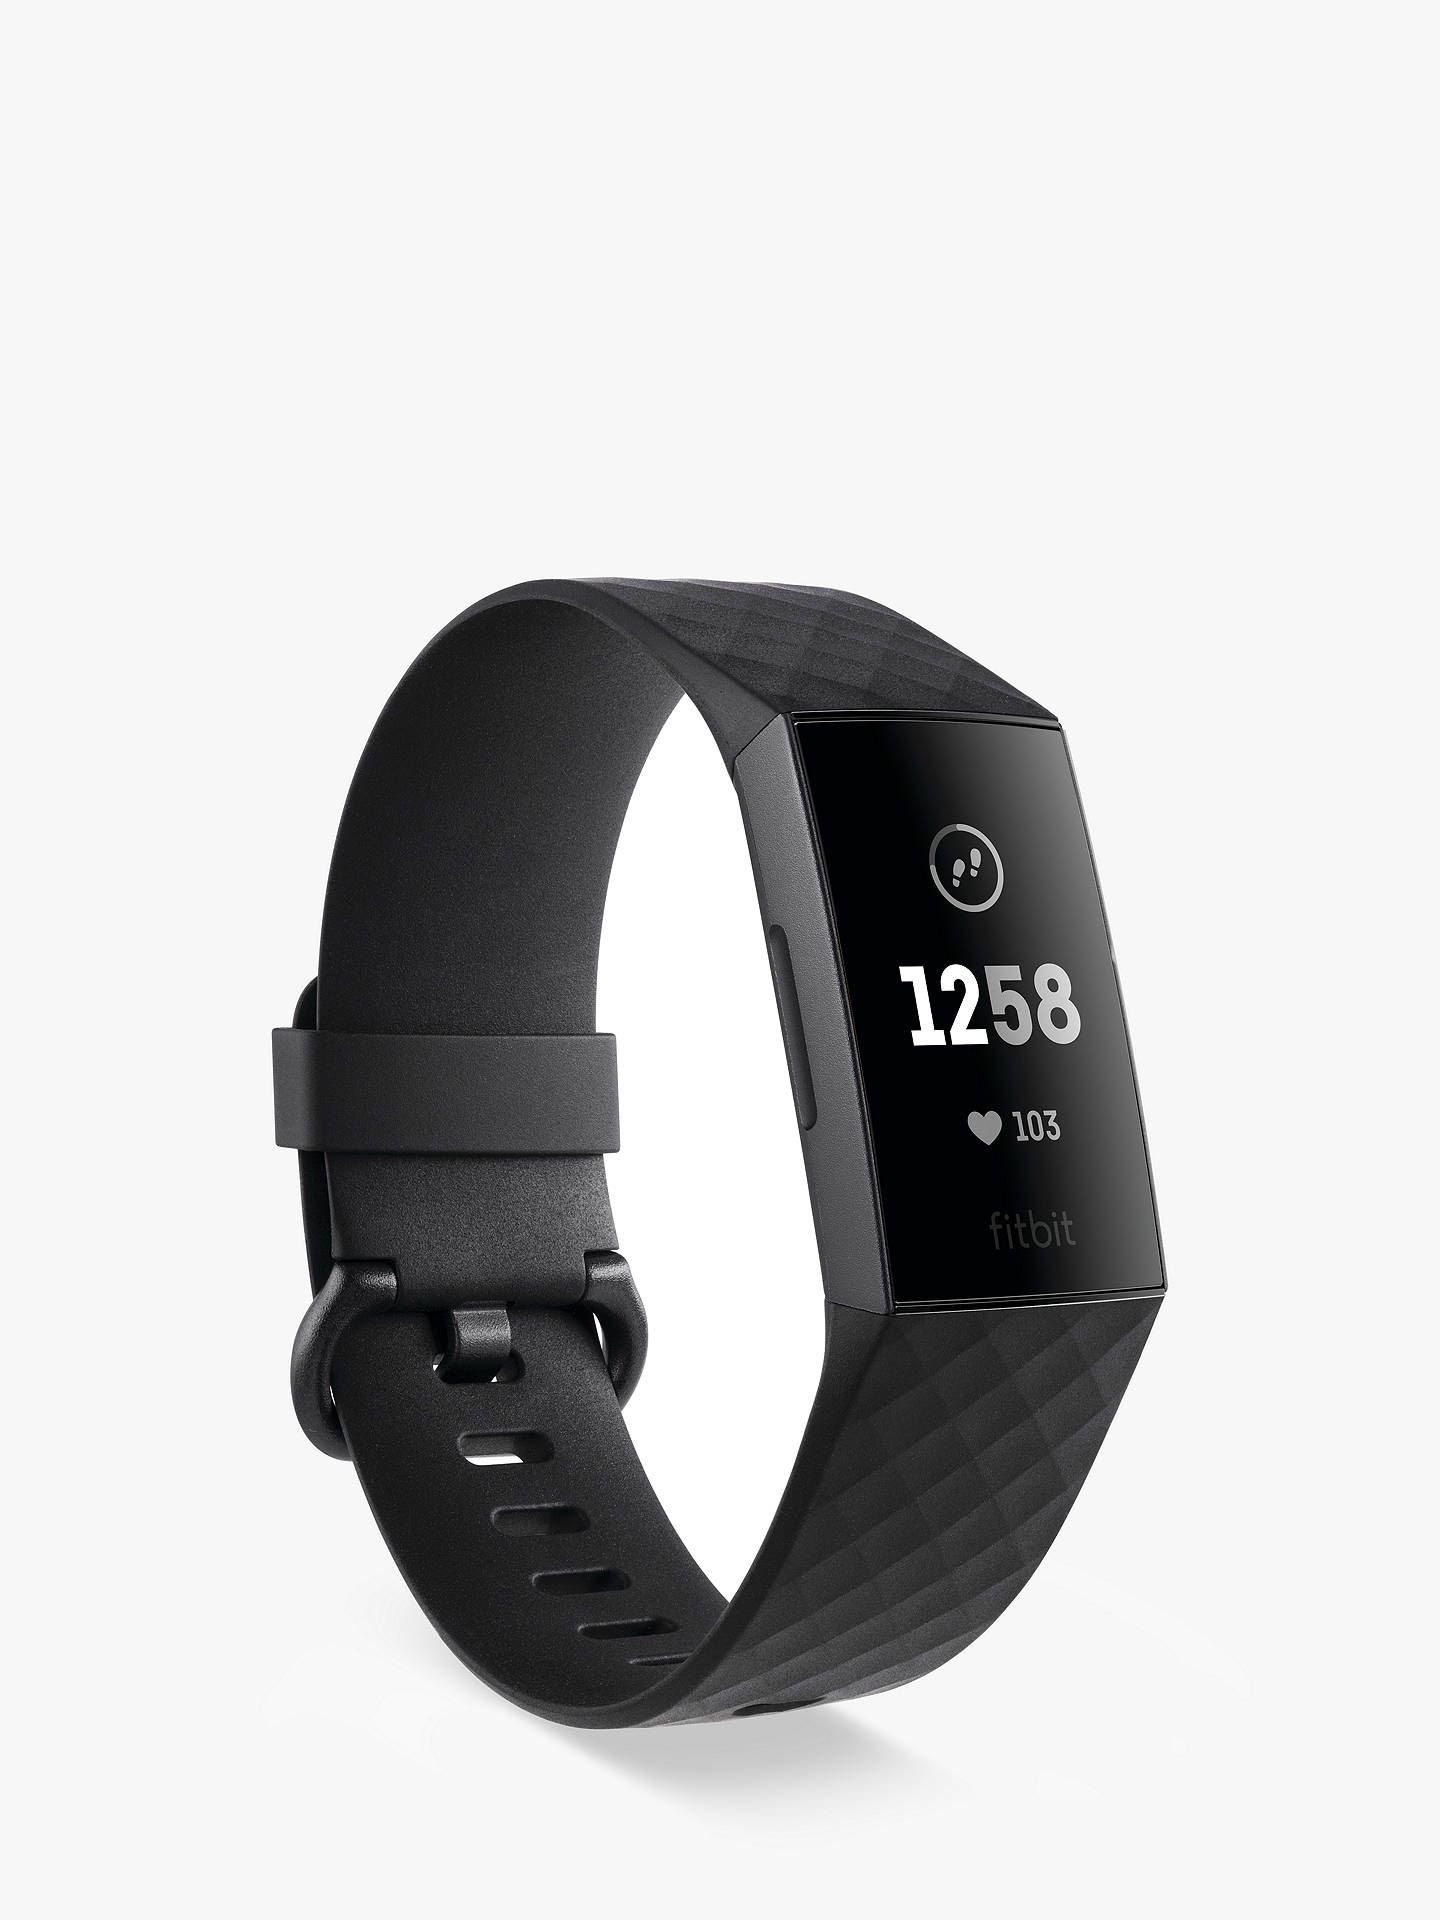 fitbit devices with gps